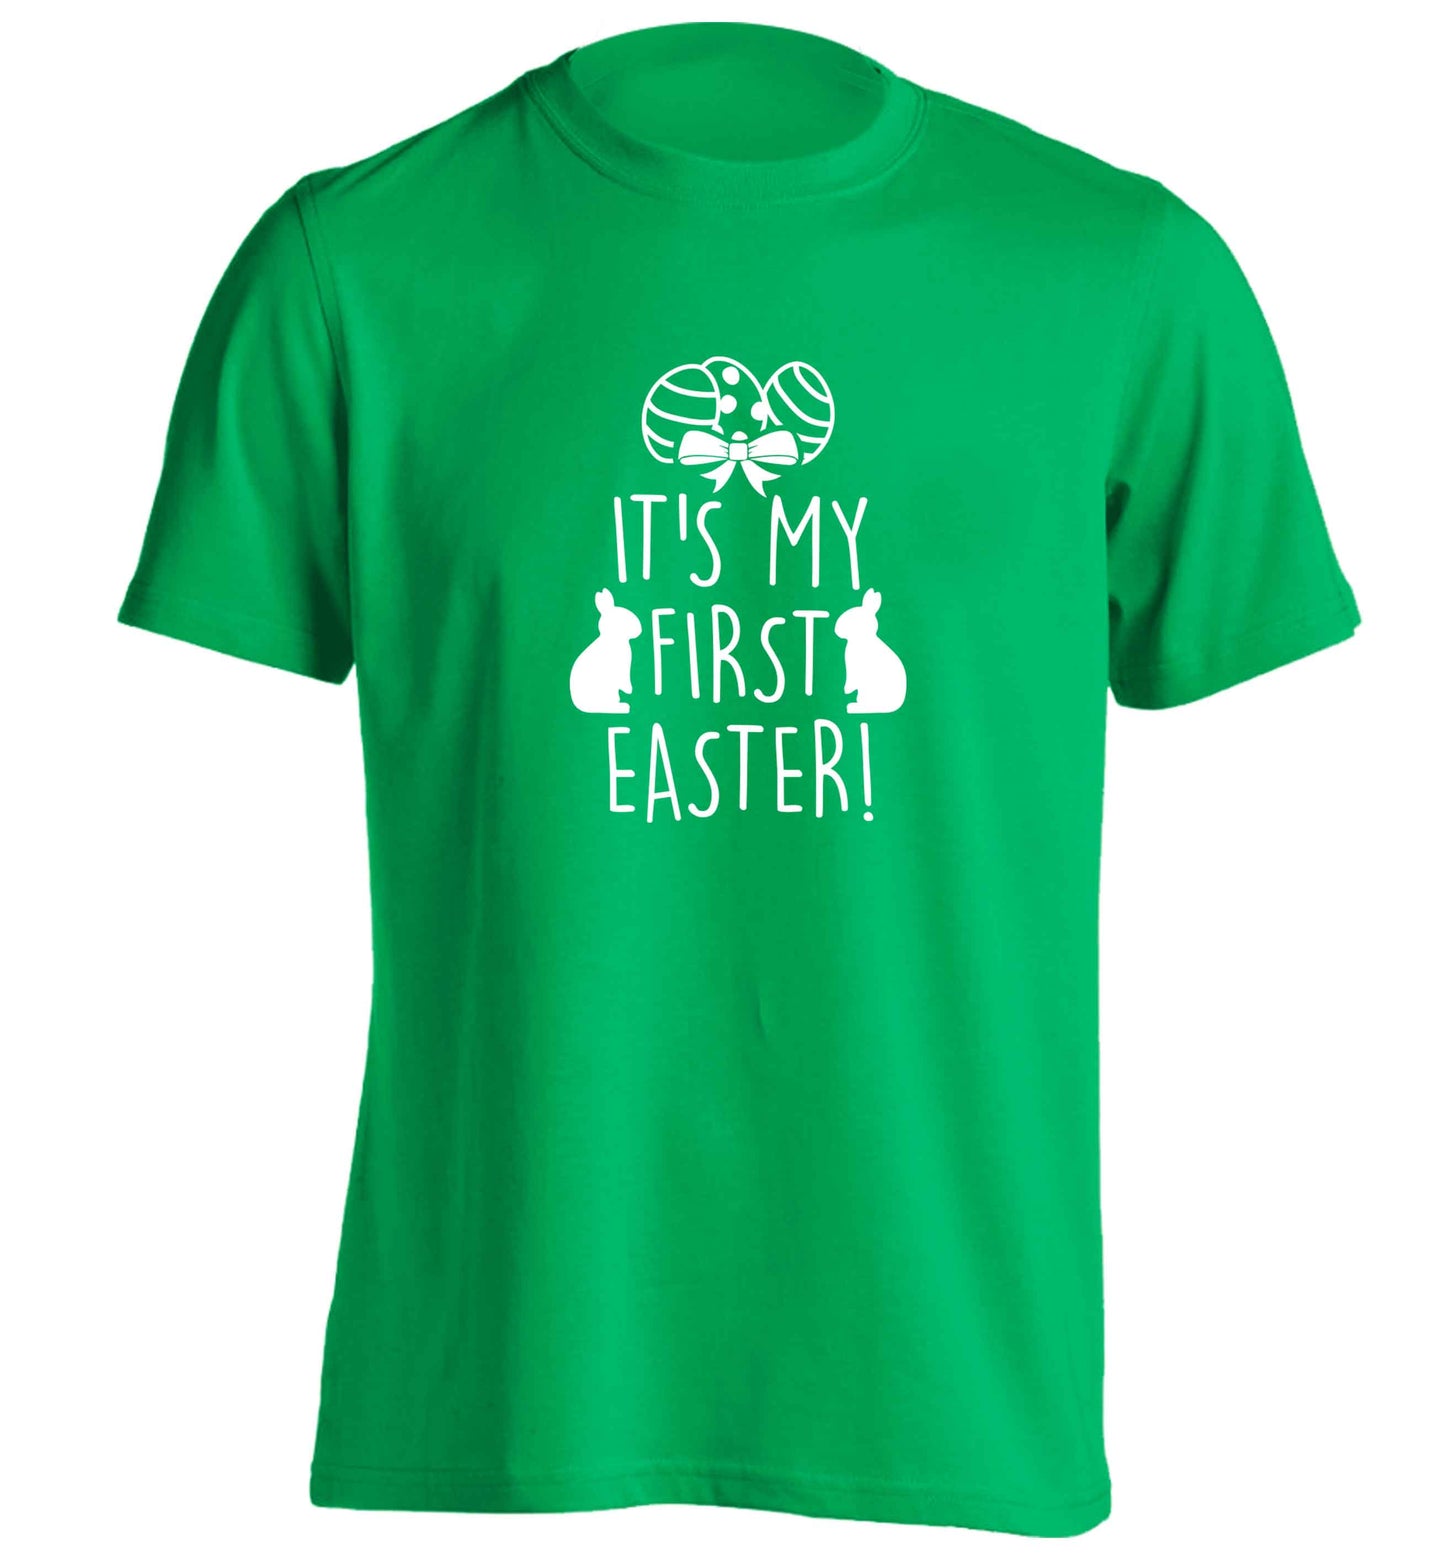 It's my first Easter adults unisex green Tshirt 2XL